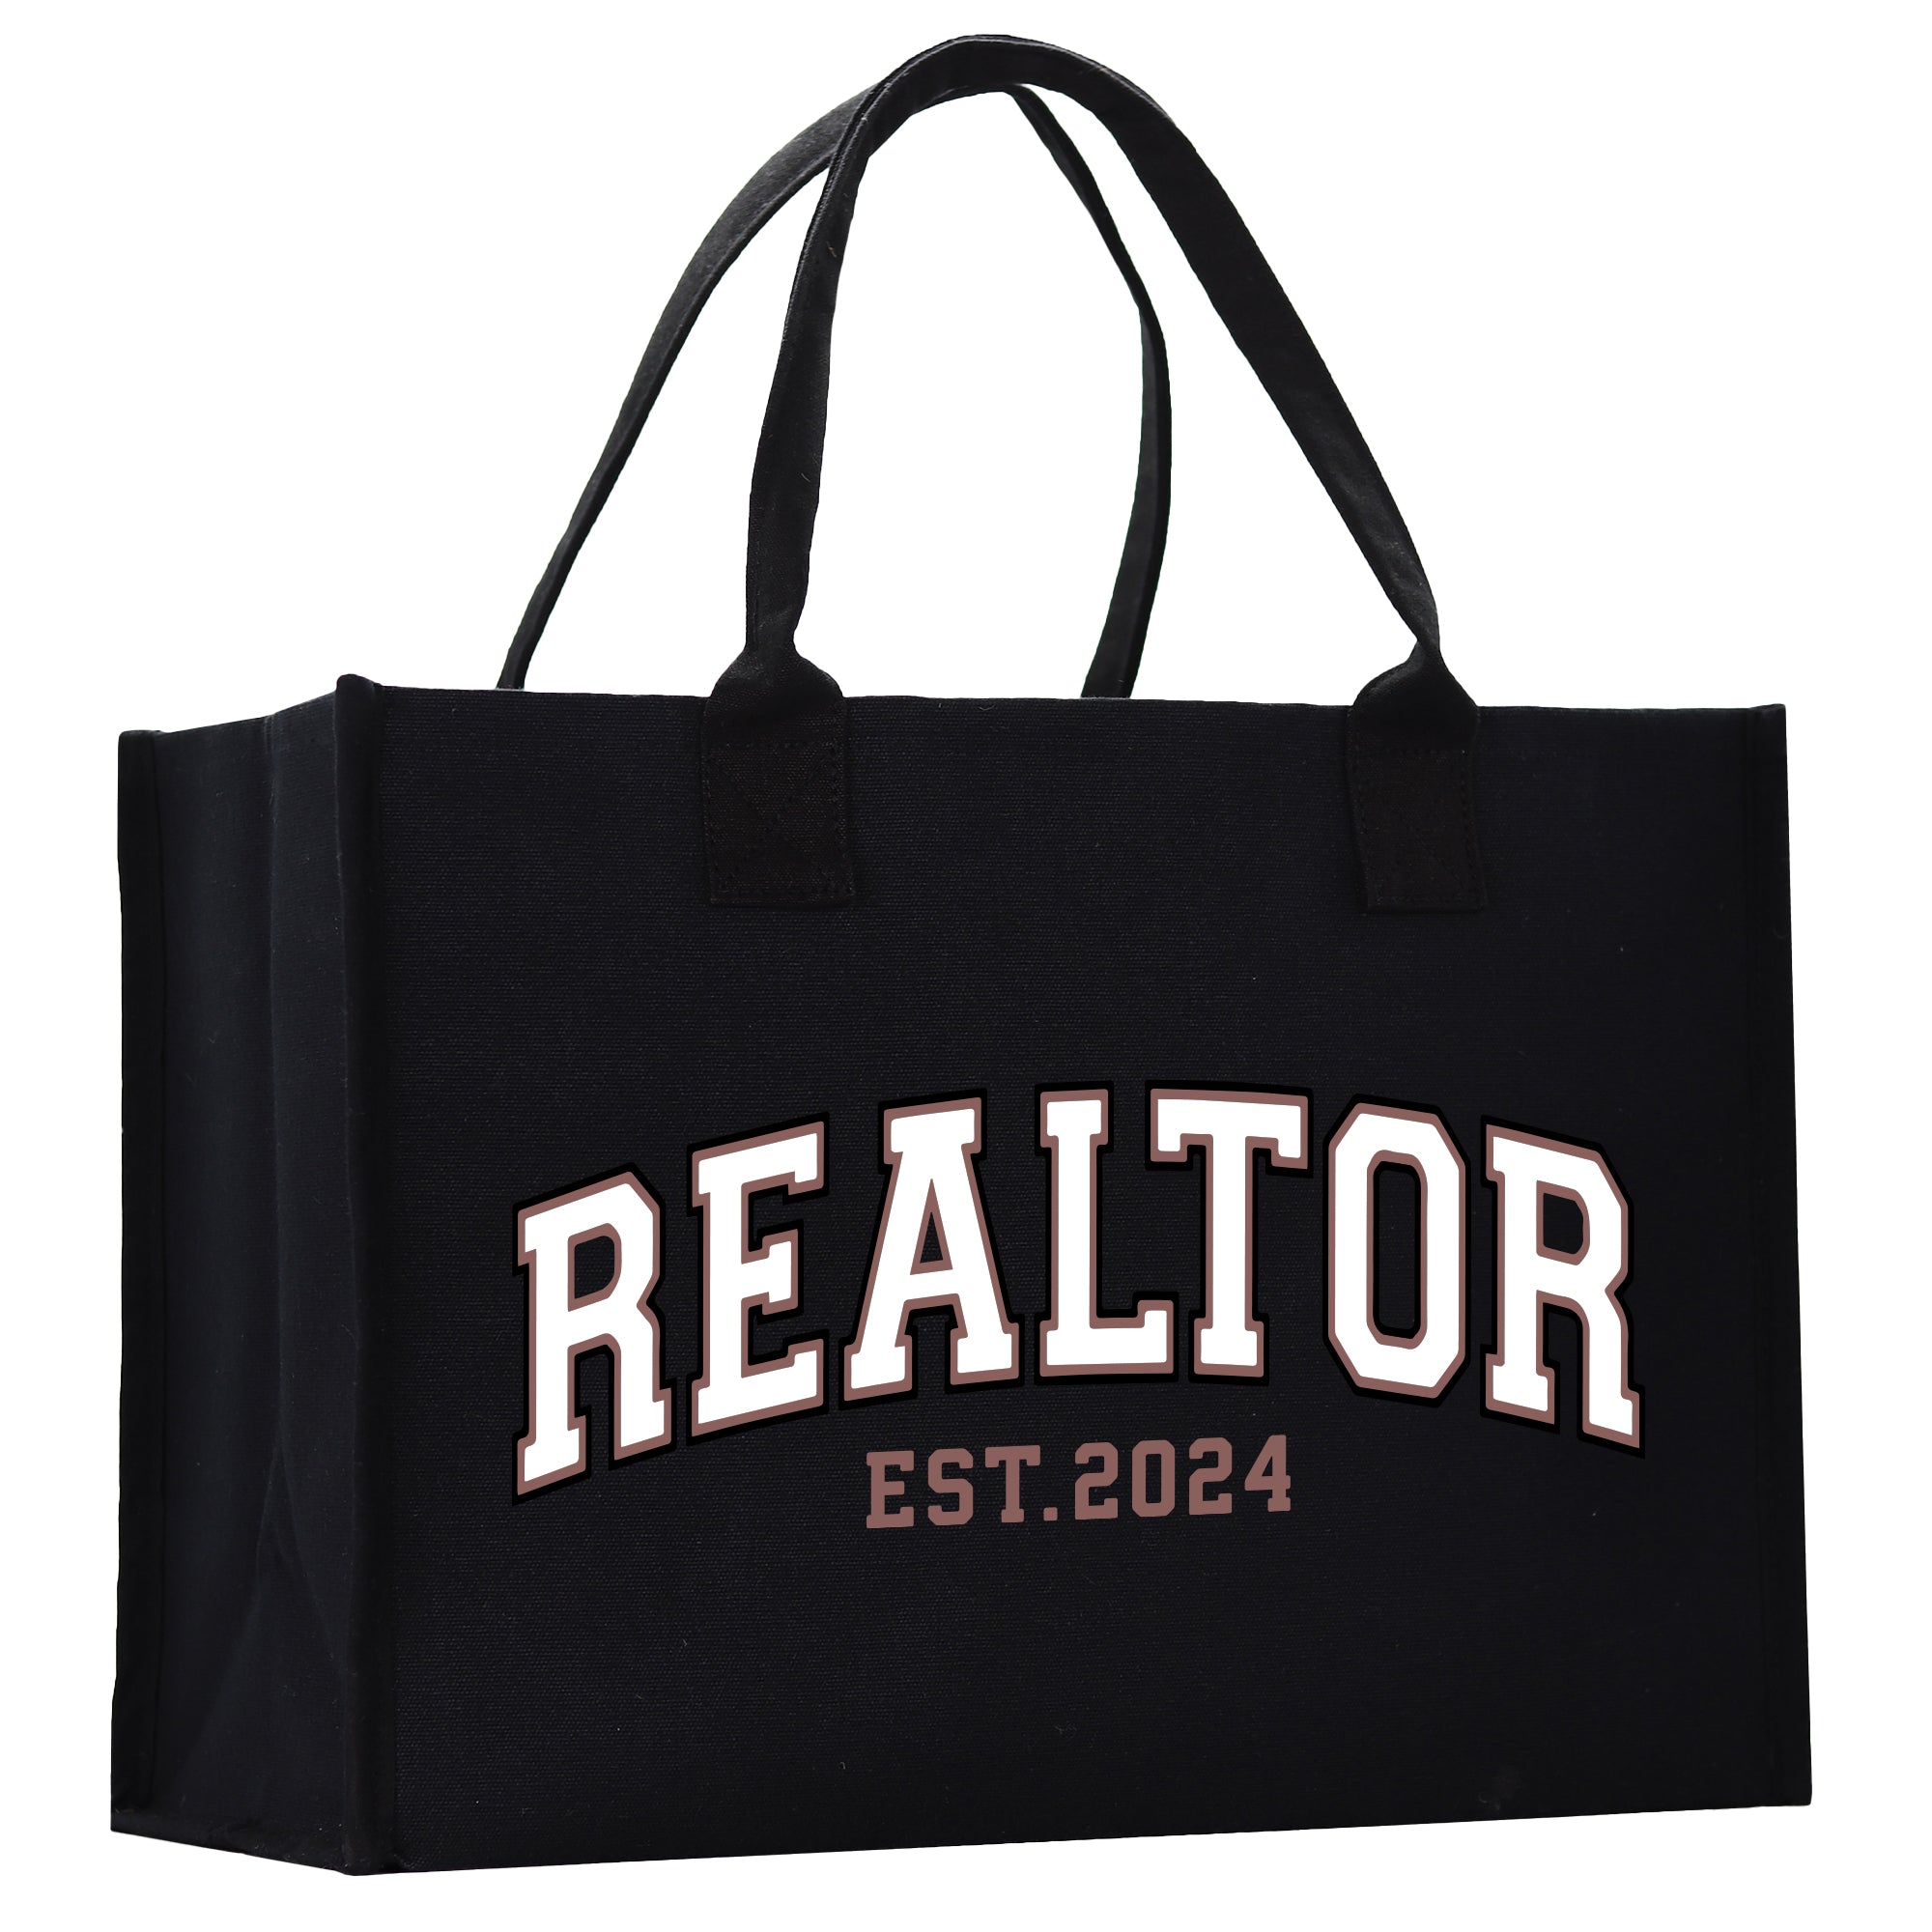 a black bag with the word realtor printed on it